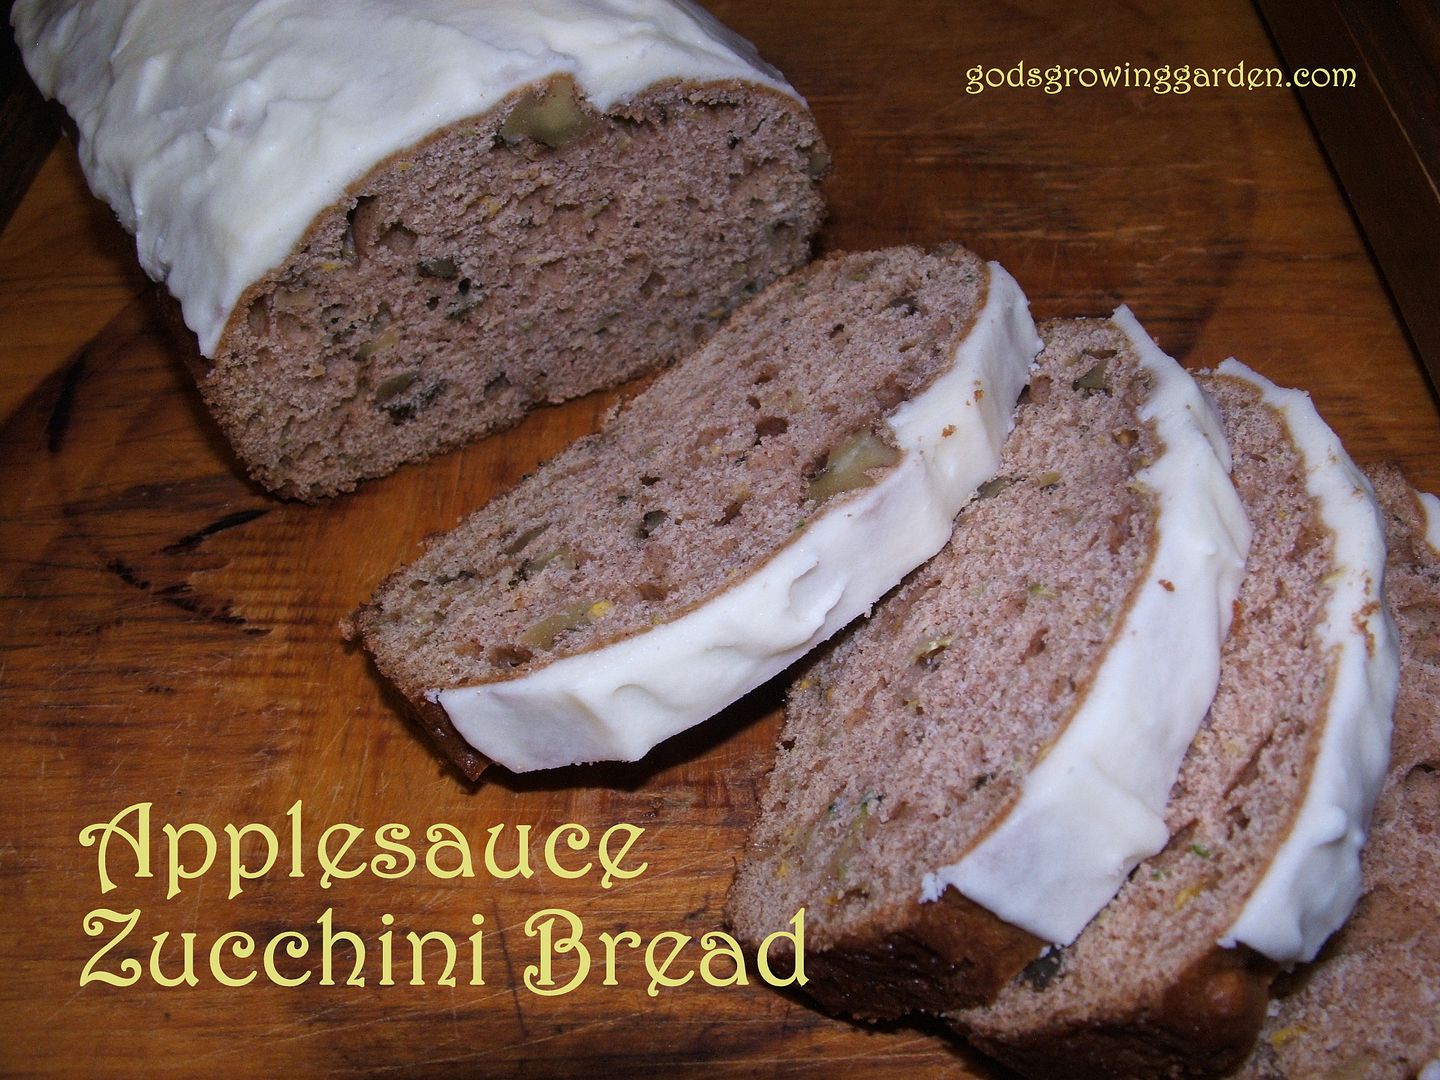 Applesauce Zucchini Bread by Angie Ouellette-Tower for godsgrowinggarden.com photo 004_zps97979f73.jpg